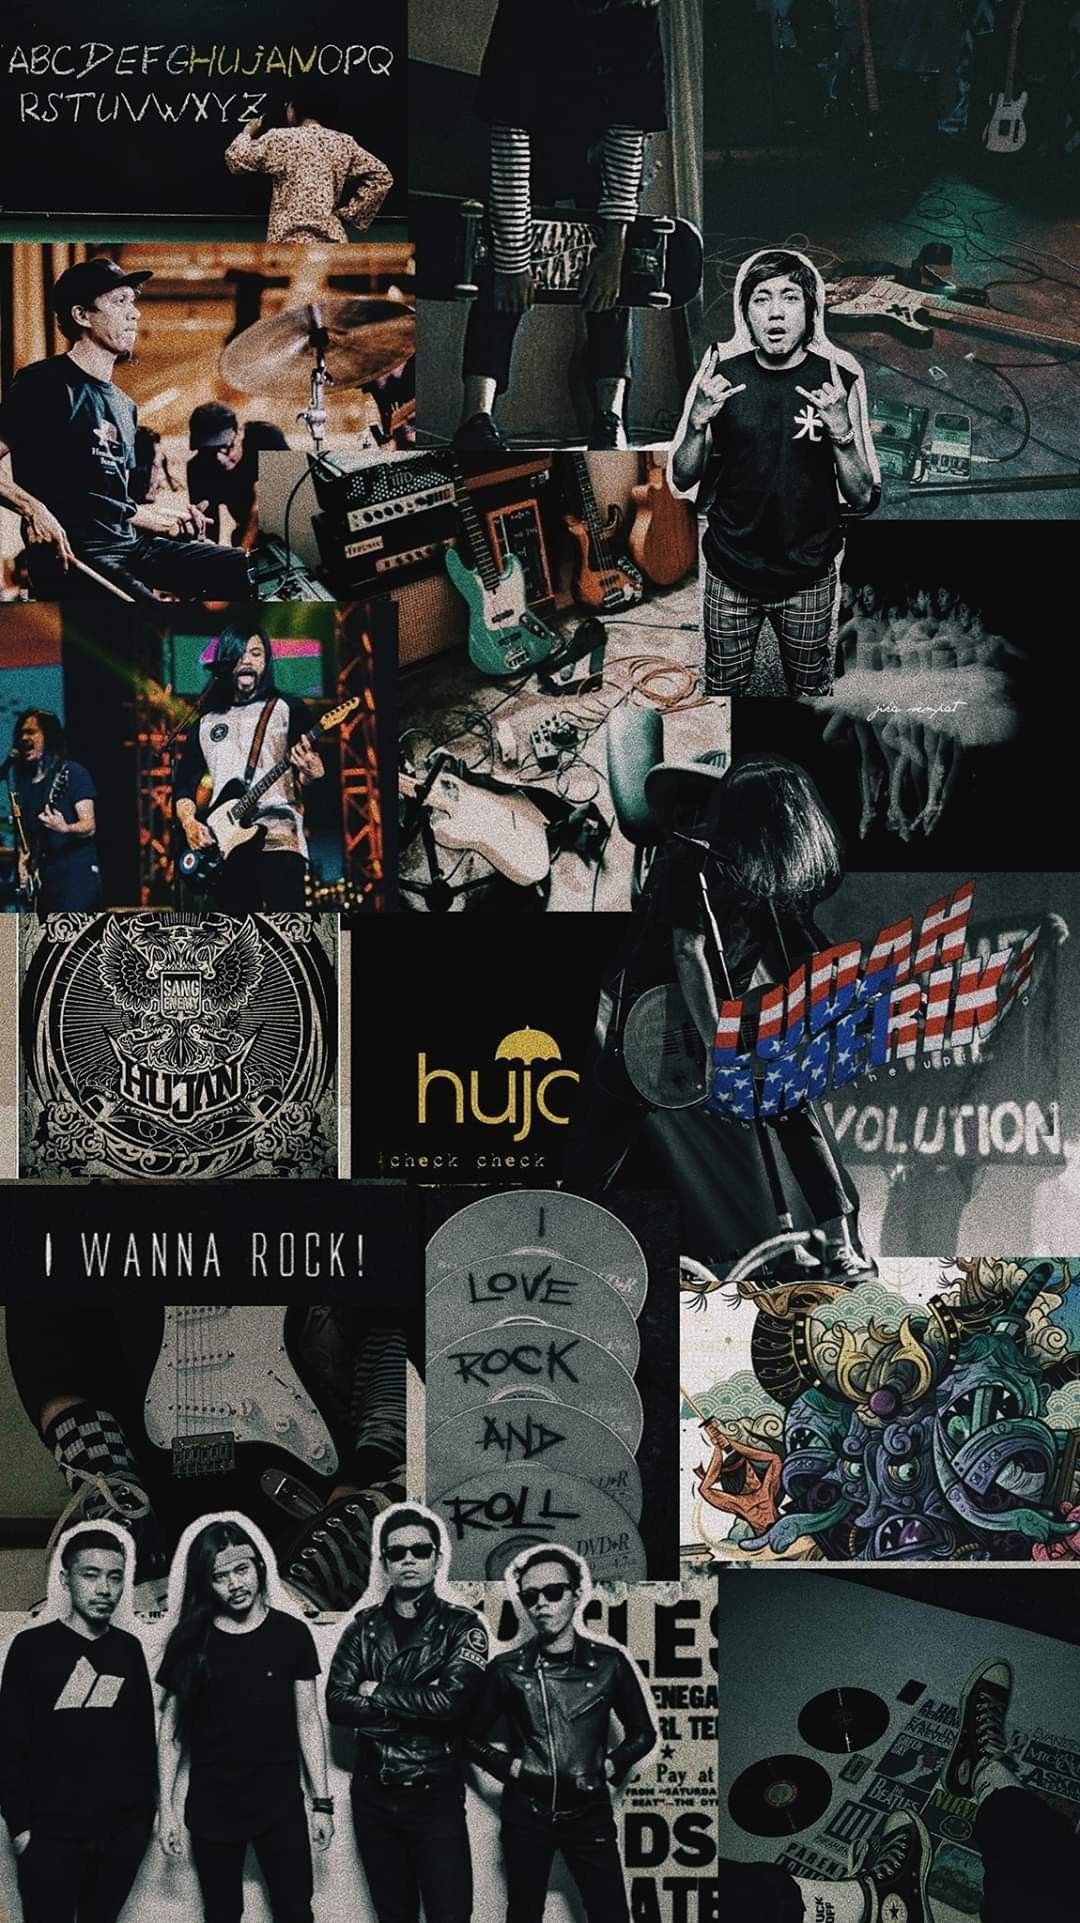 Free Download RockRoll Wallpaper Rock Band Posters Iphone, 46% OFF